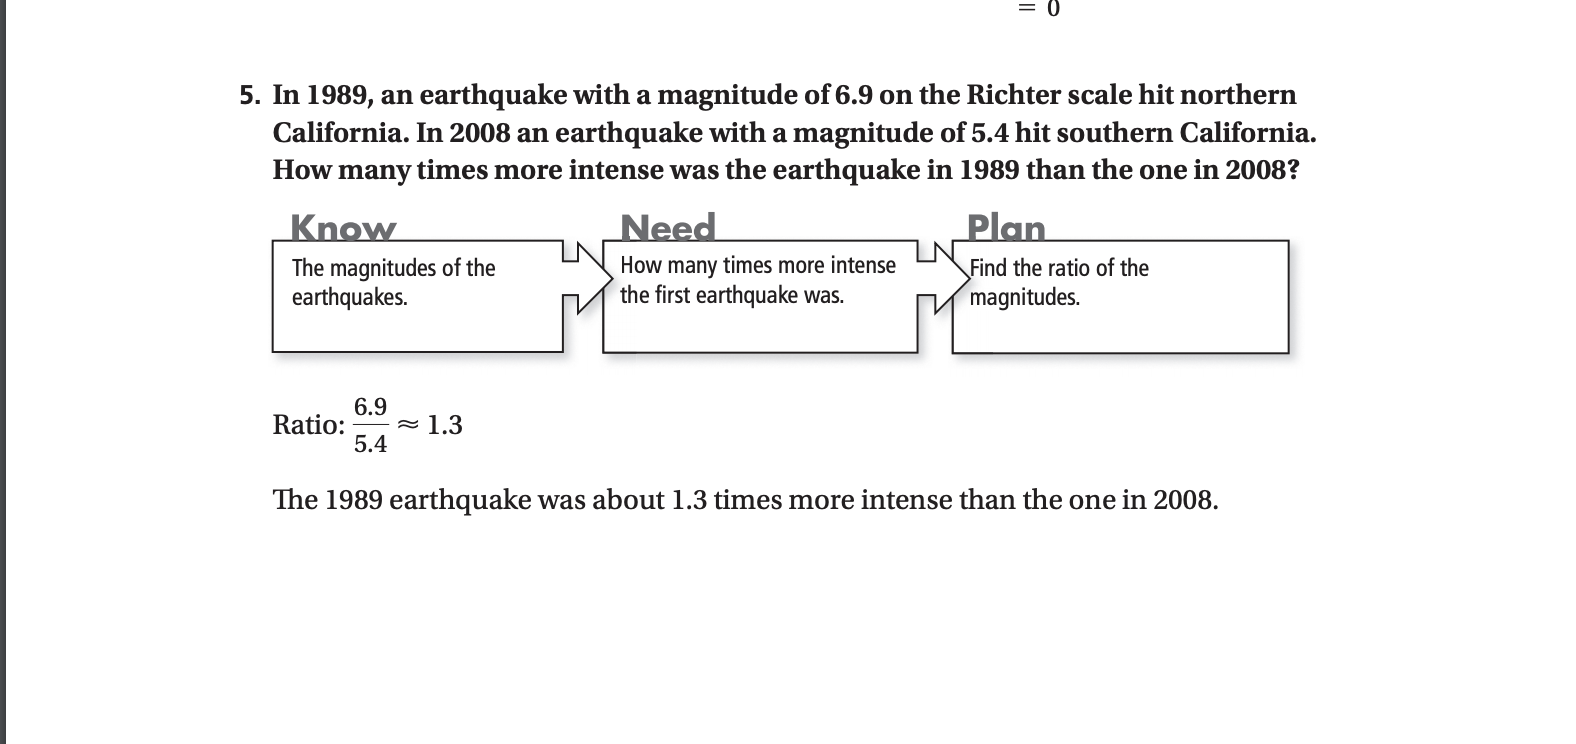 5. In 1989, an earthquake with a magnitude of 6.9 on the Richter scale hit northern
California. In 2008 an earthquake with a magnitude of 5.4 hit southern California.
times more intense was the earthquake in 1989 than the one in 2008?
How
many
Need
Plan
Know
How many times more intense
the first earthquake was.
The magnitudes of the
earthquakes.
Find the ratio of the
magnitudes.
6.9
Ratio:
5.4
= 1.3
The 1989 earthquake was about 1.3 times more intense than the one in 2008.
